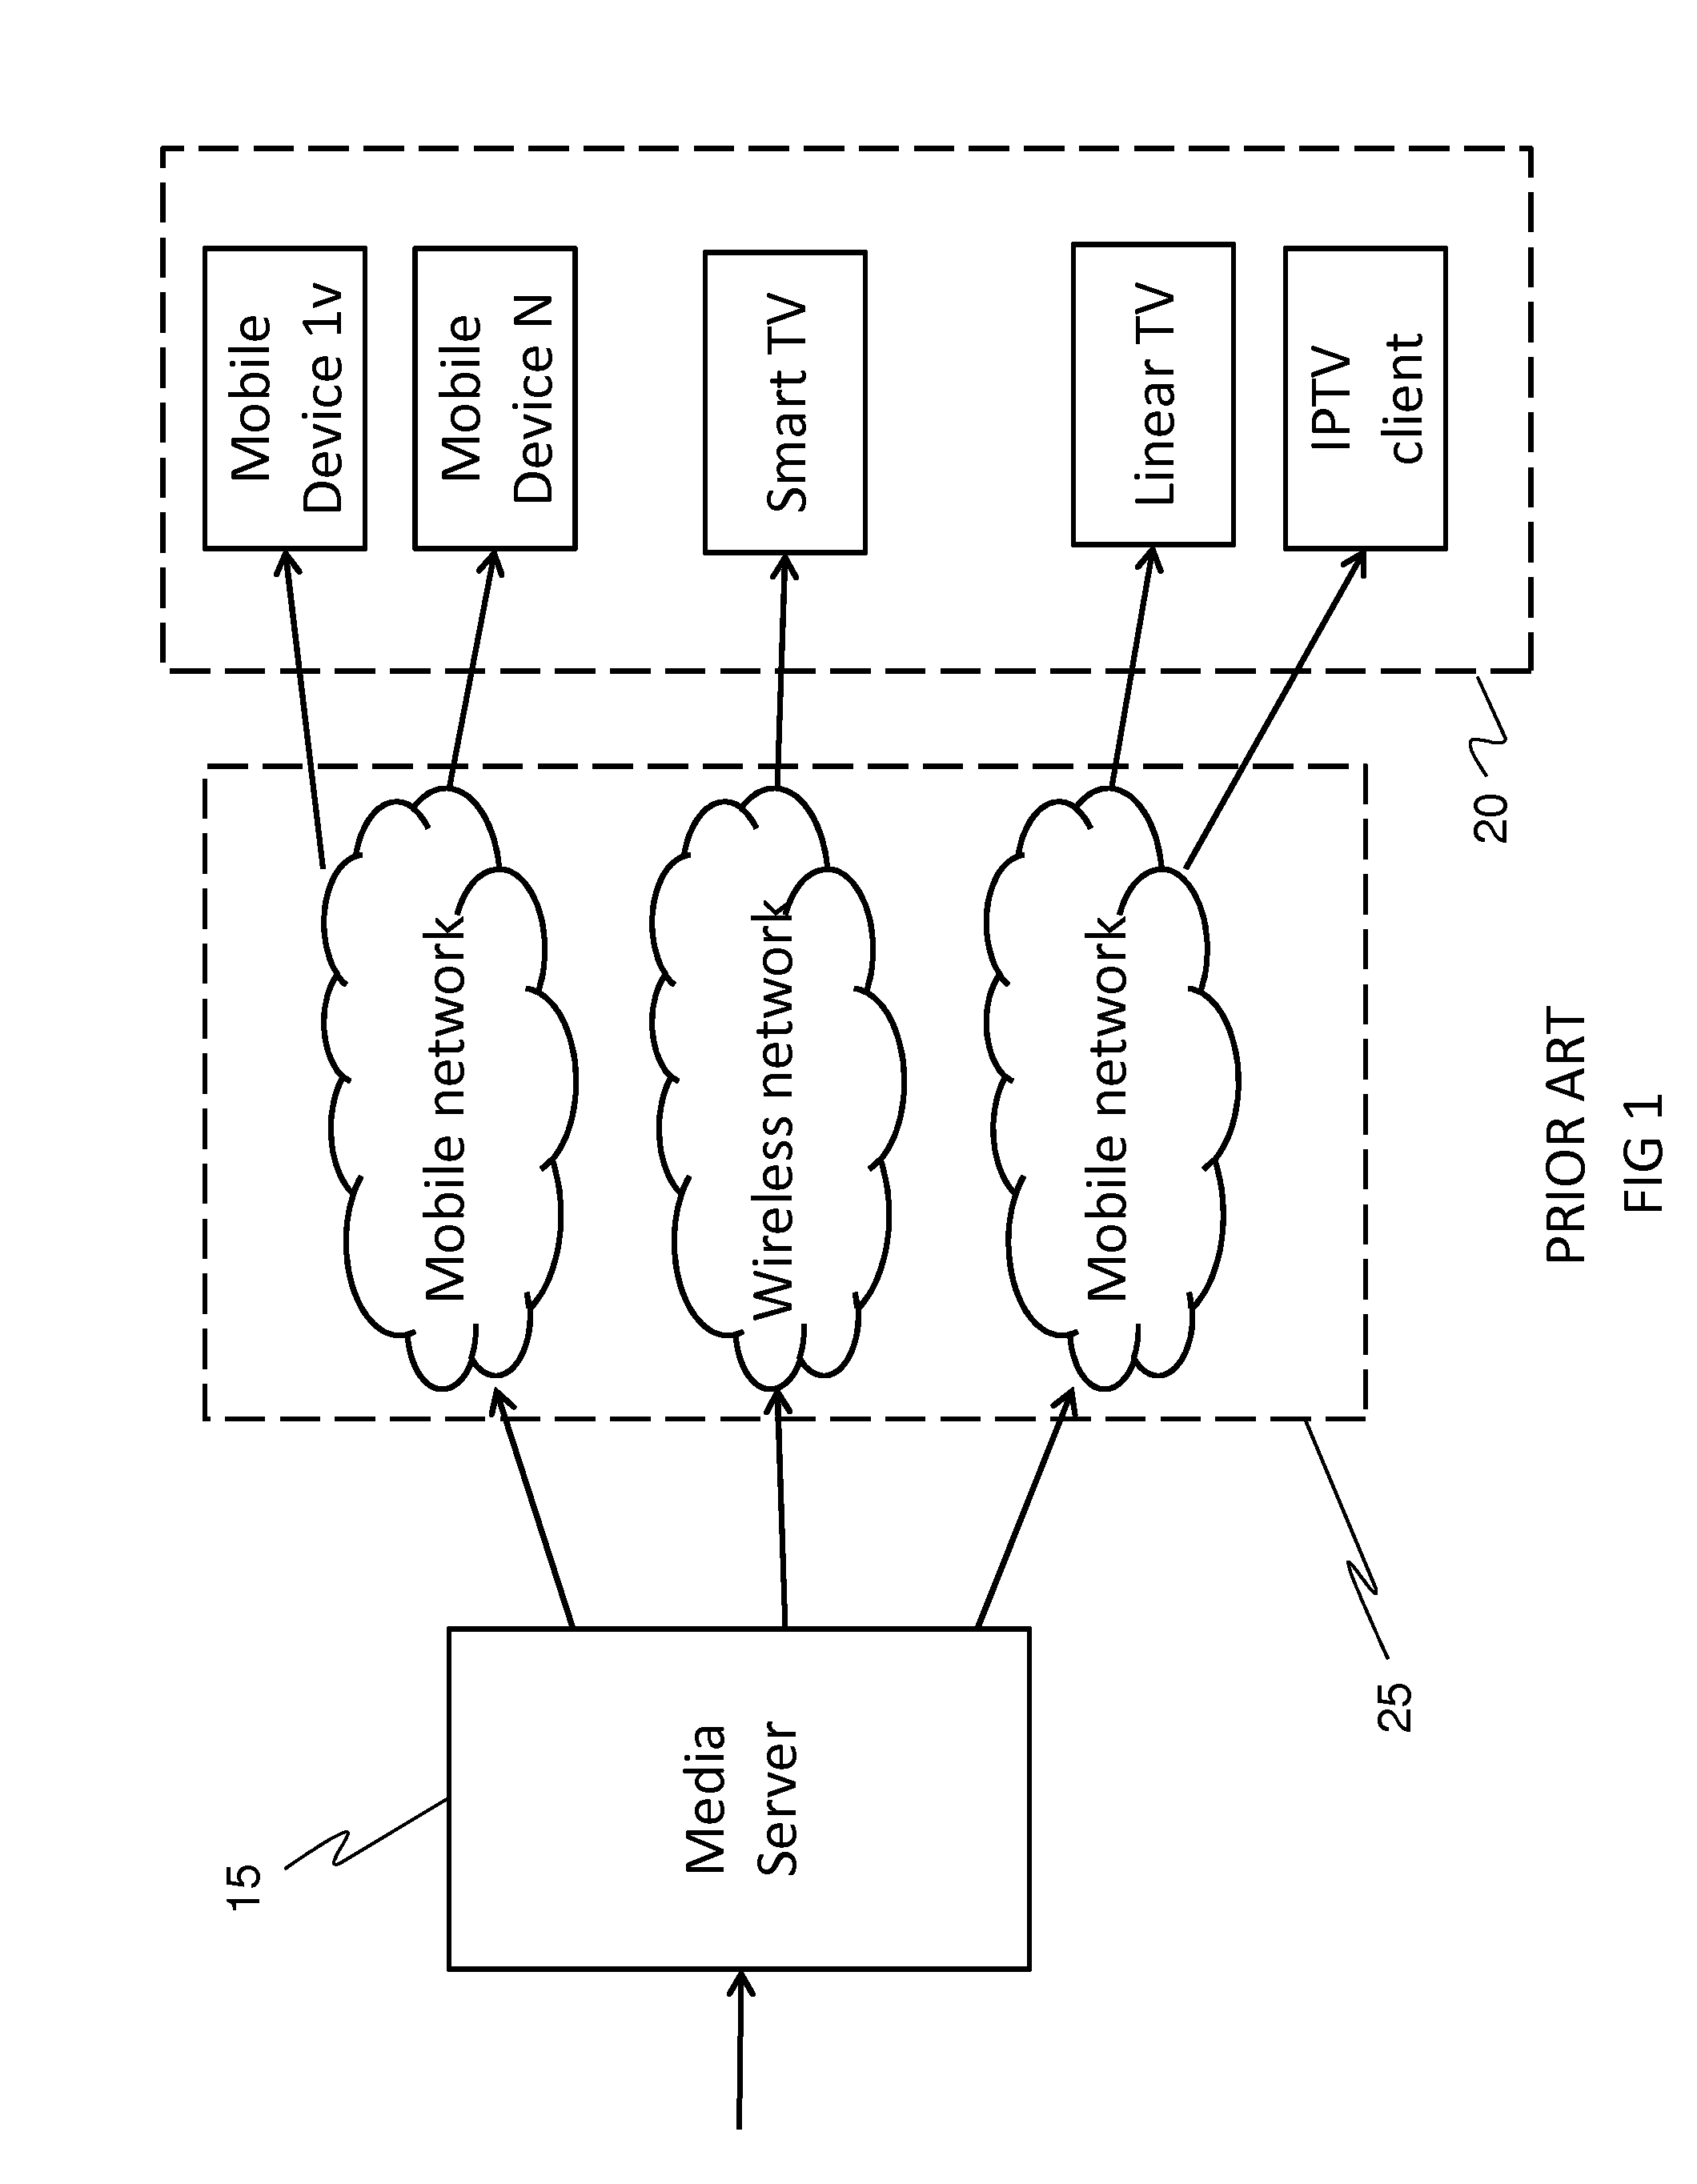 Adaptive profile switching system and method for media streaming over IP networks